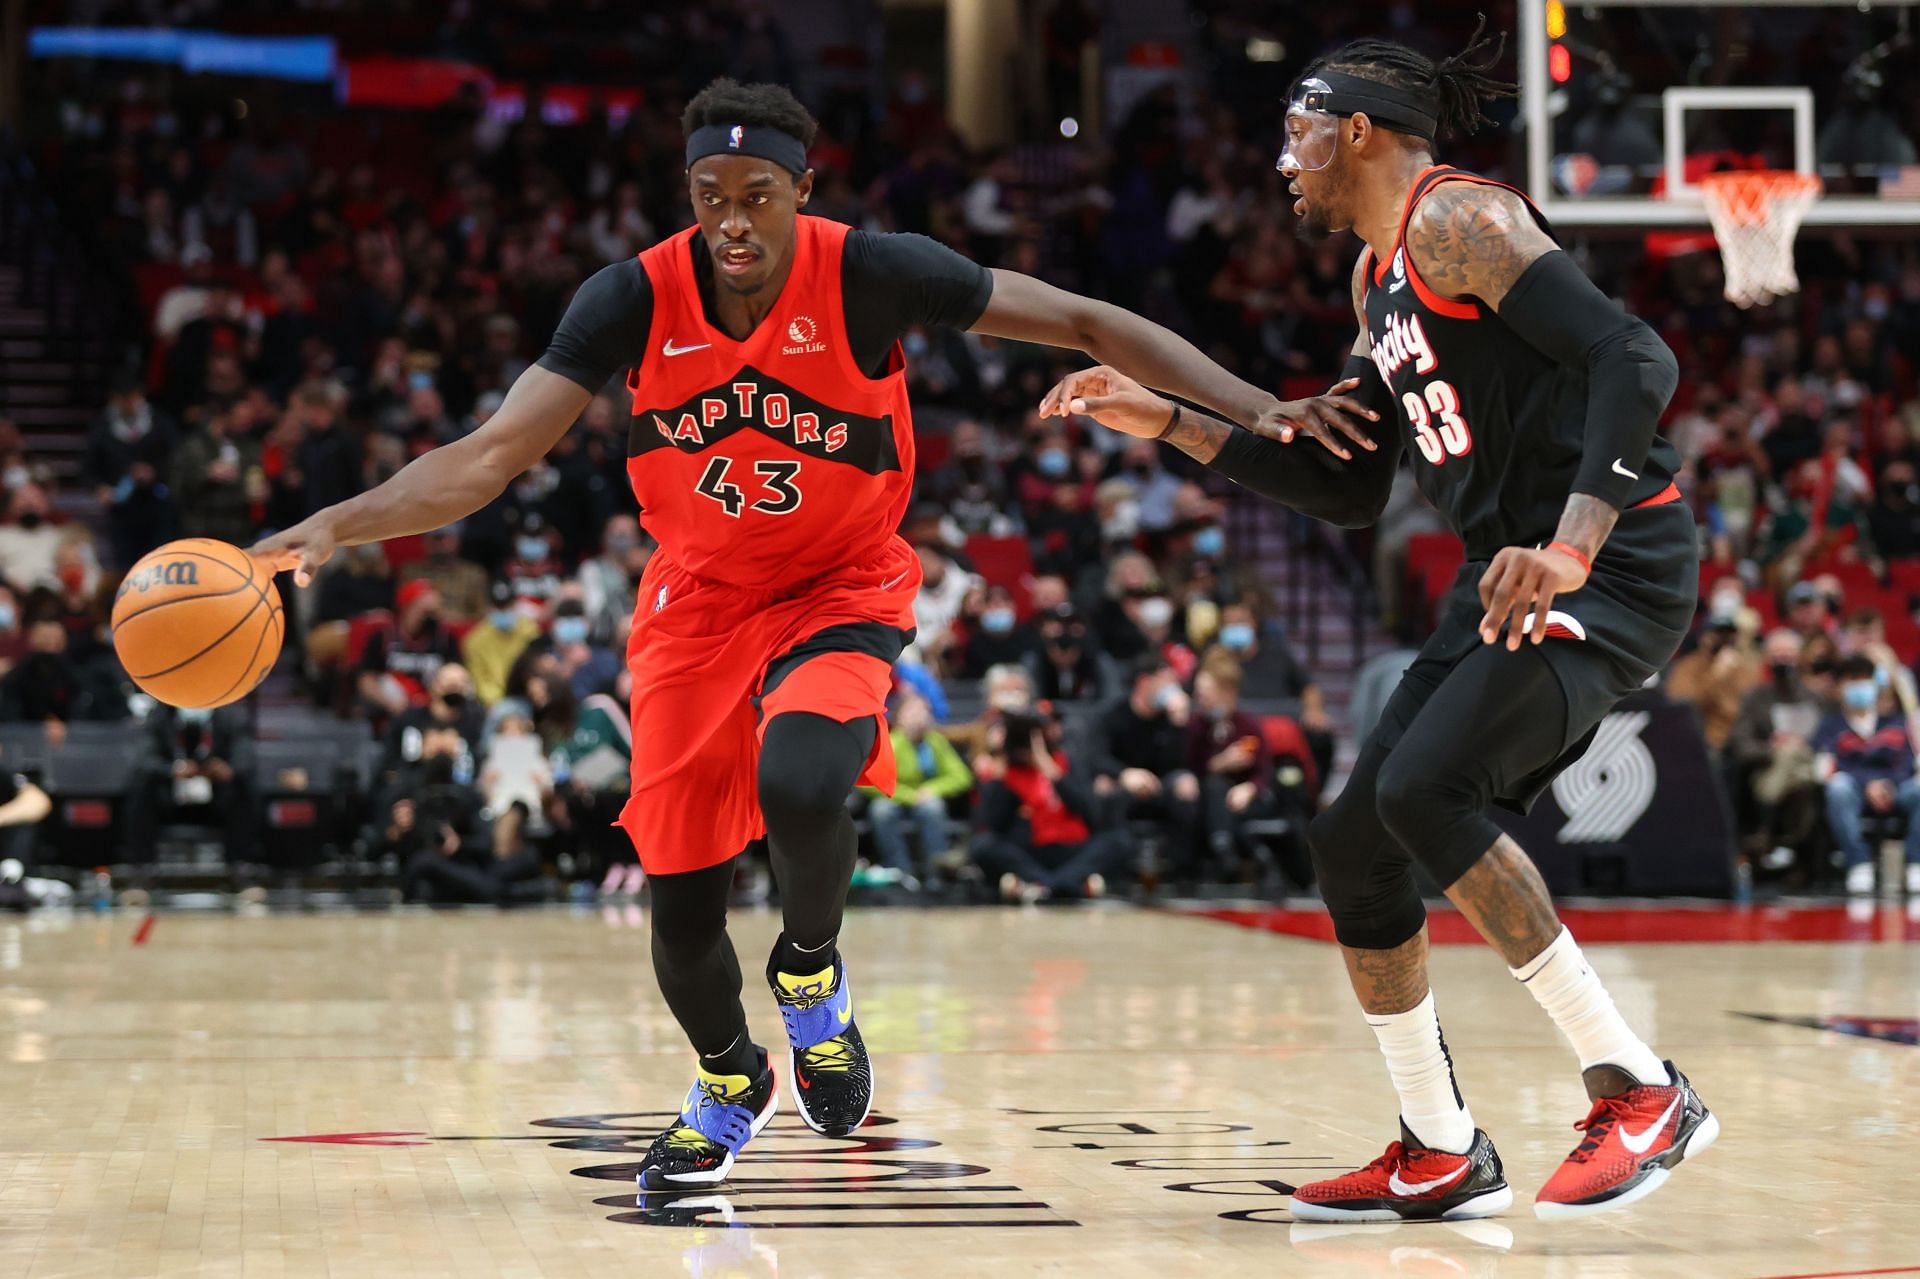 Pascal Siakam attempts to attack the basket